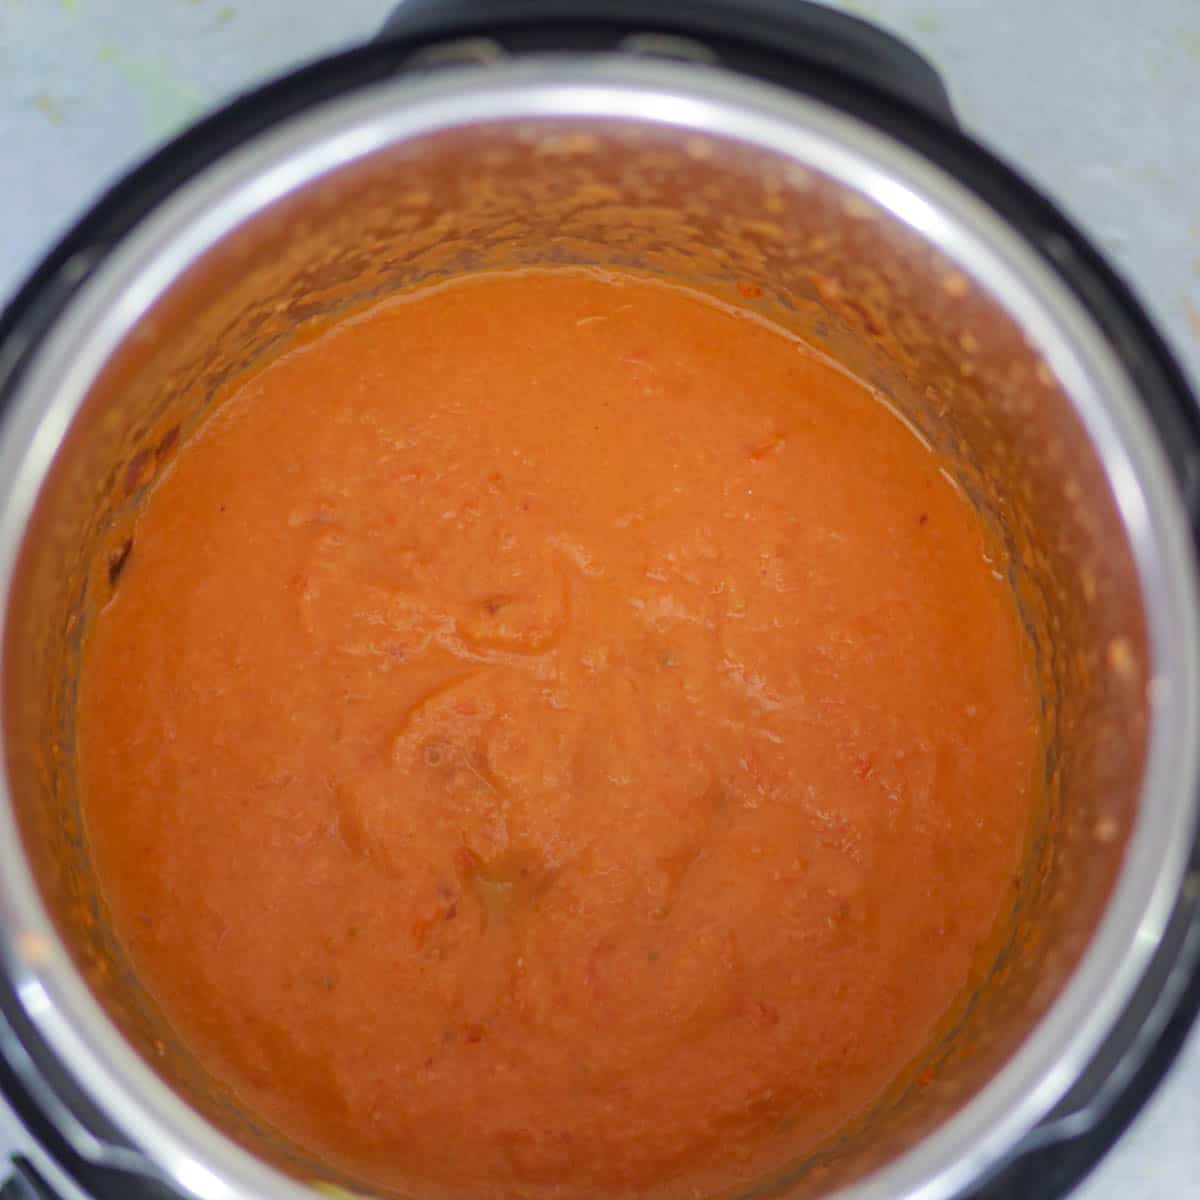 Blend onion and tomatoes until smooth.